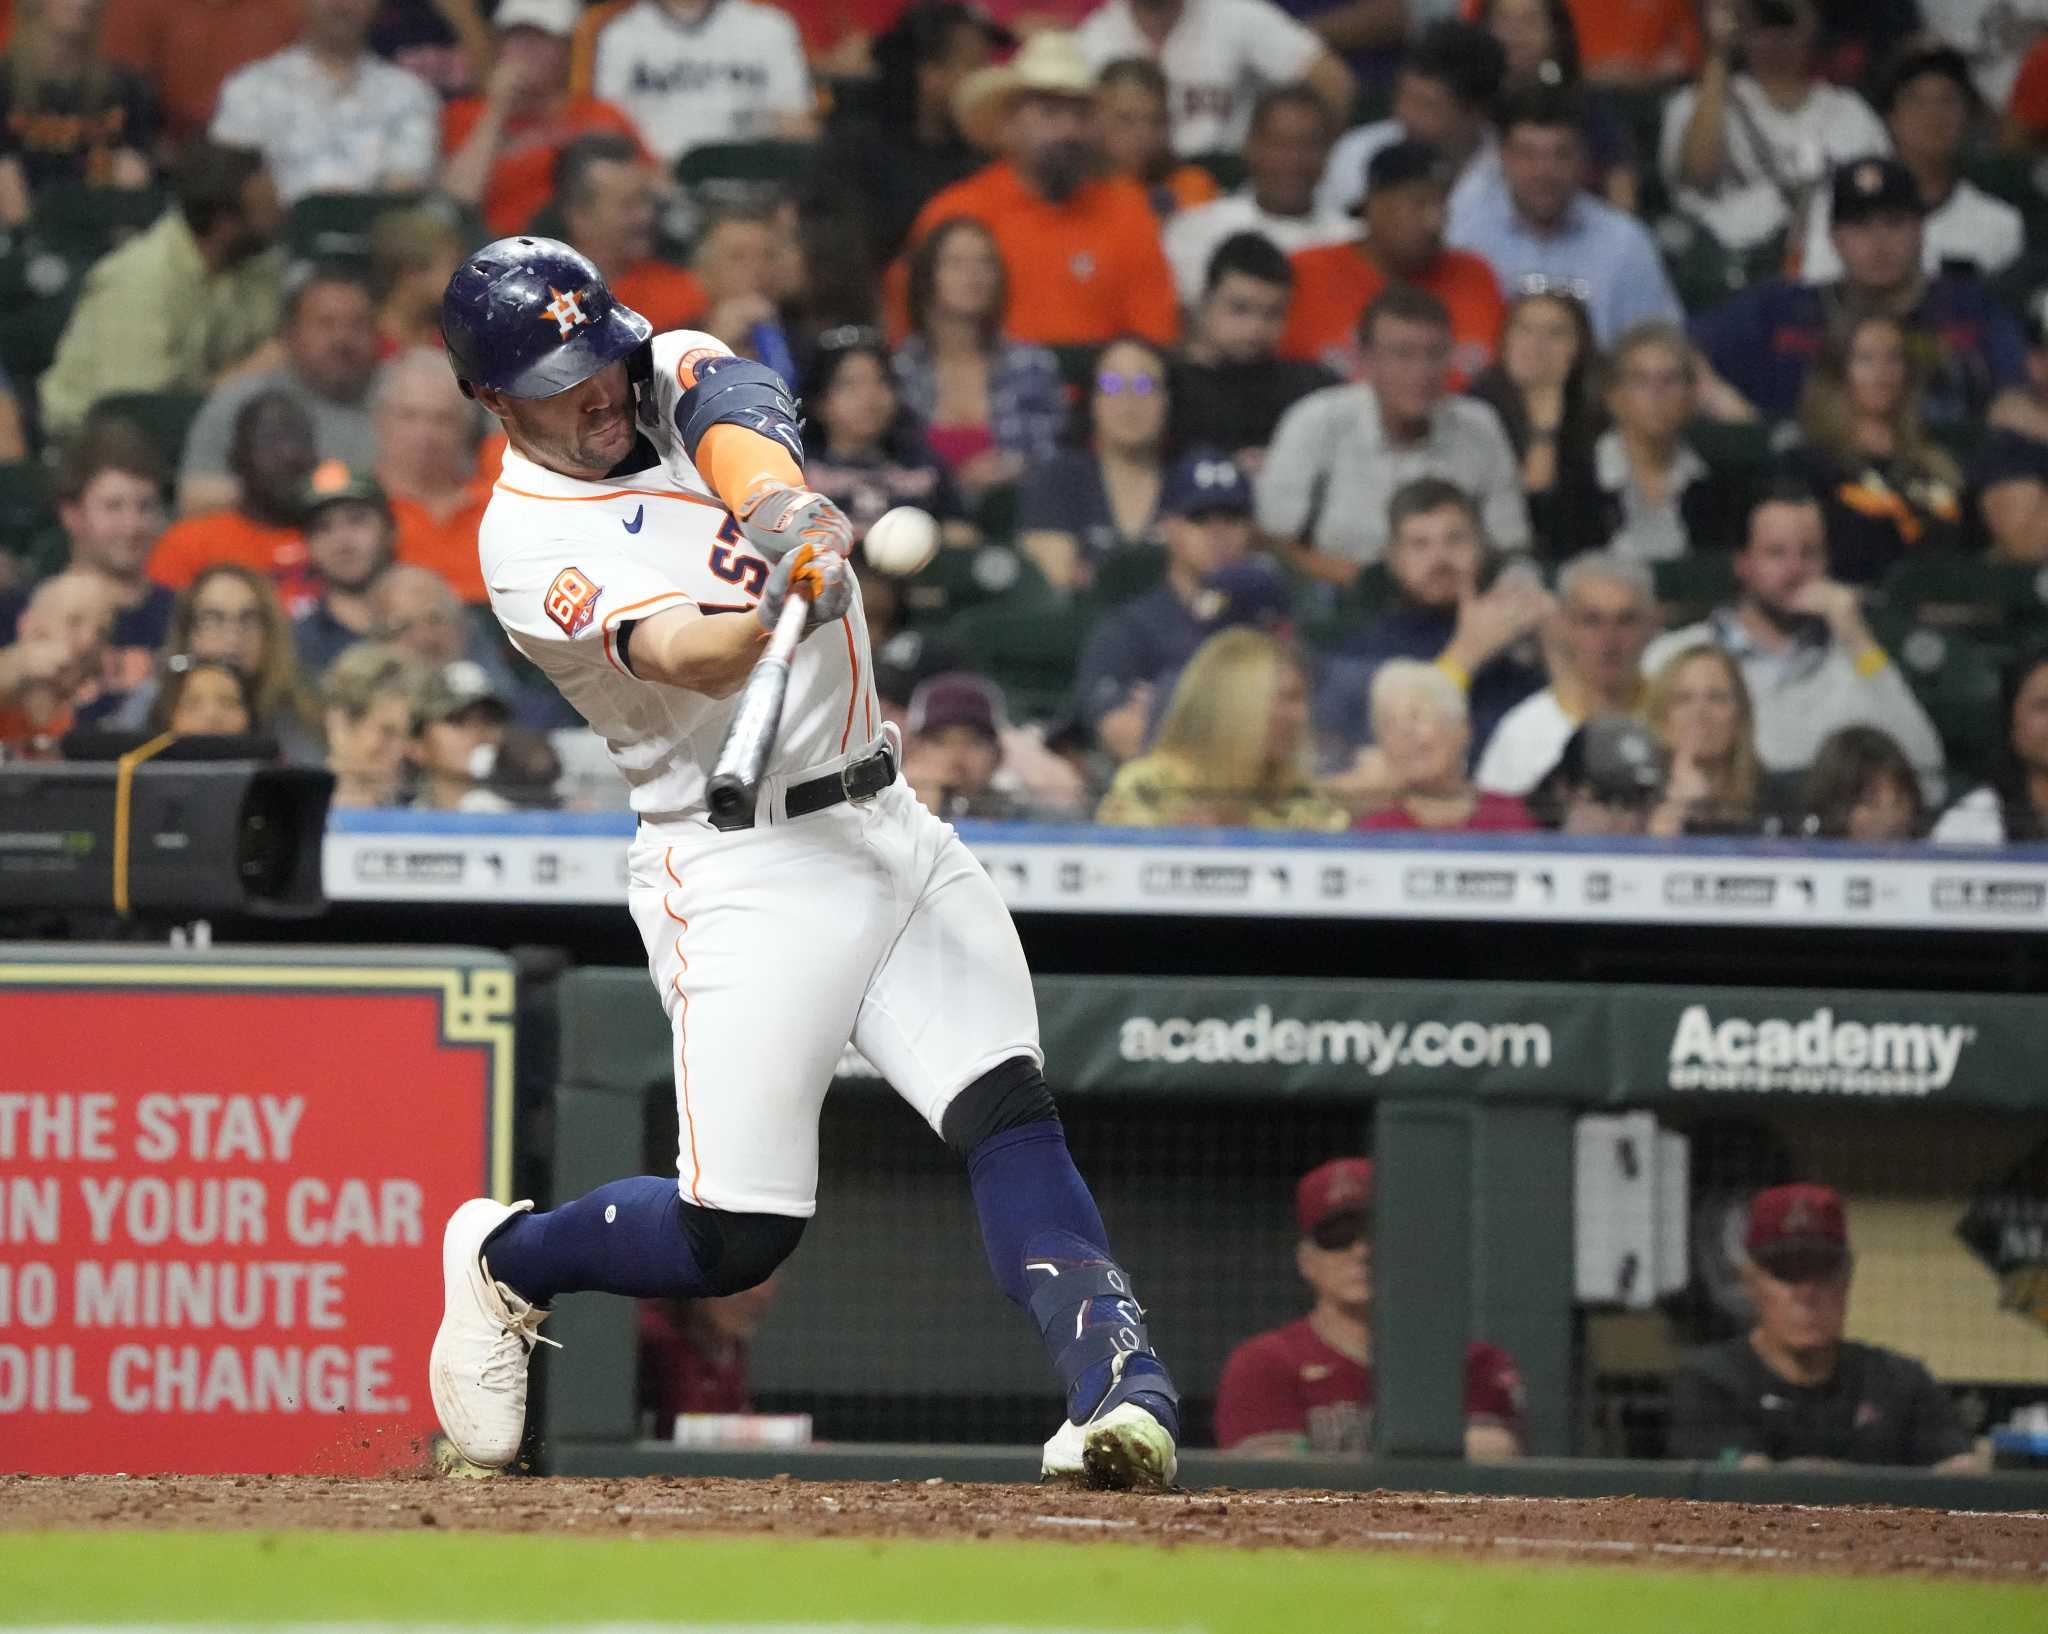 Mauricio Dubon's late single lifts Astros over Orioles to stay atop AL